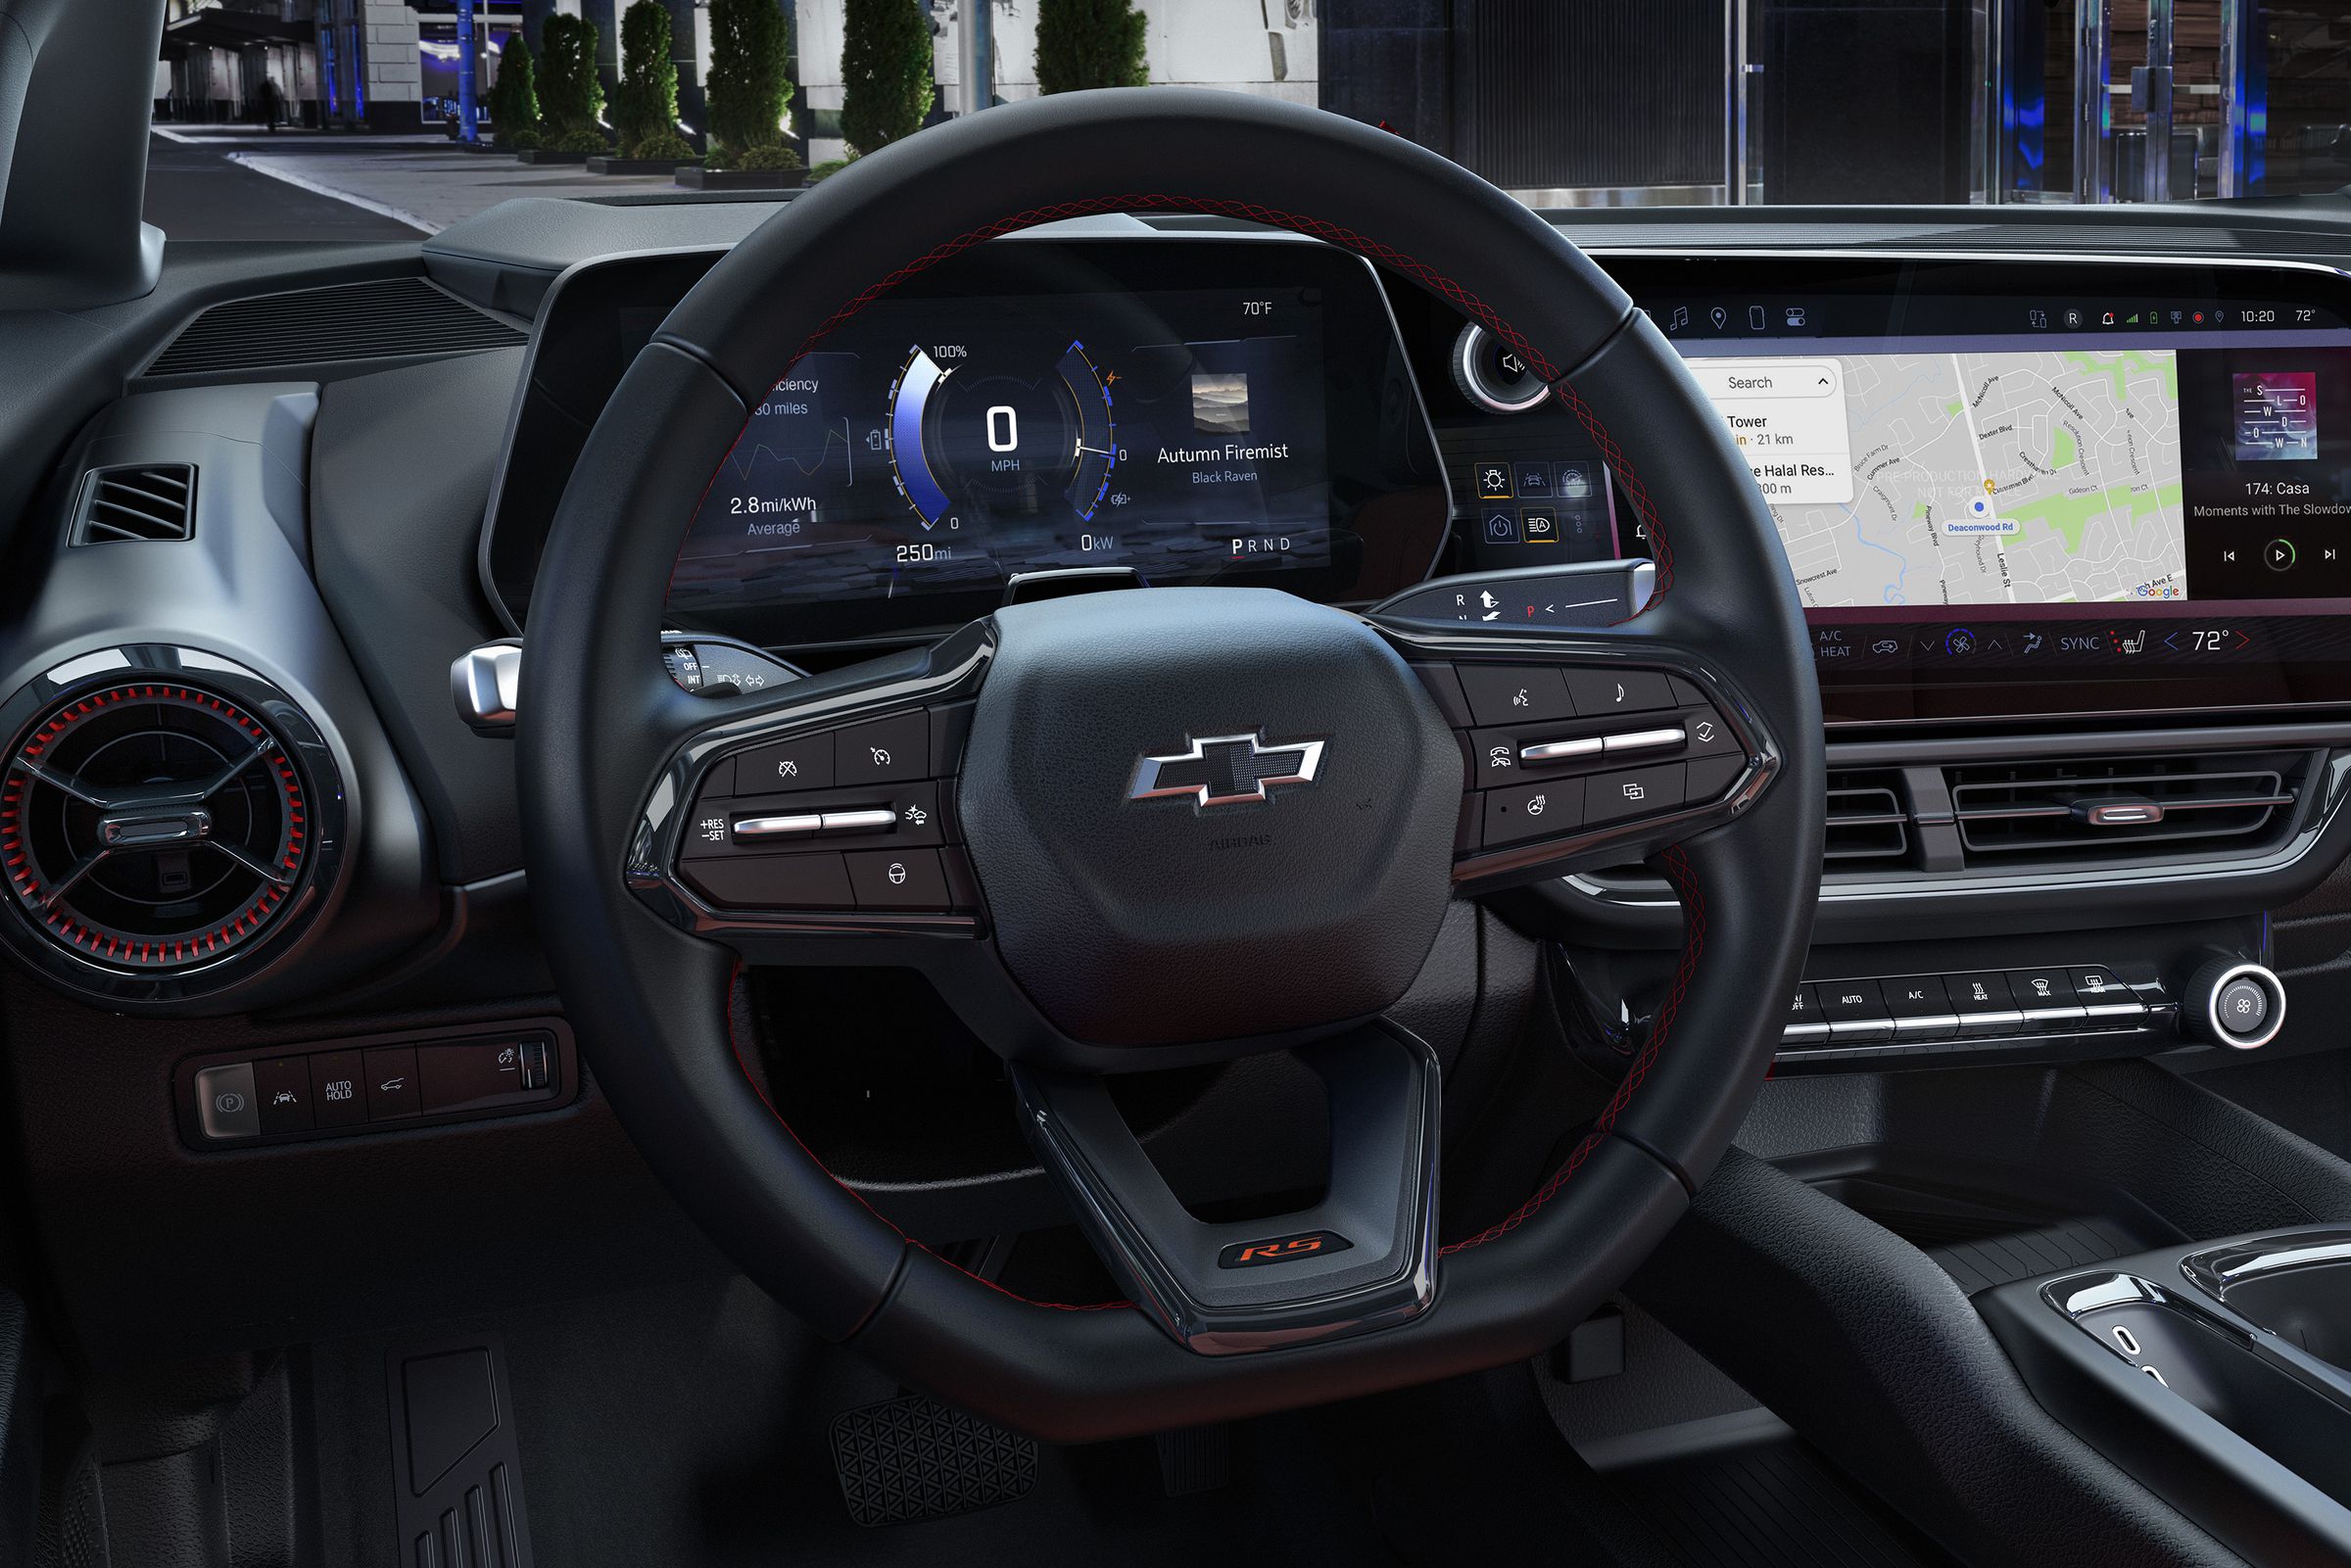 While the RS trims feature a darker interior, a larger screen, and more tech.